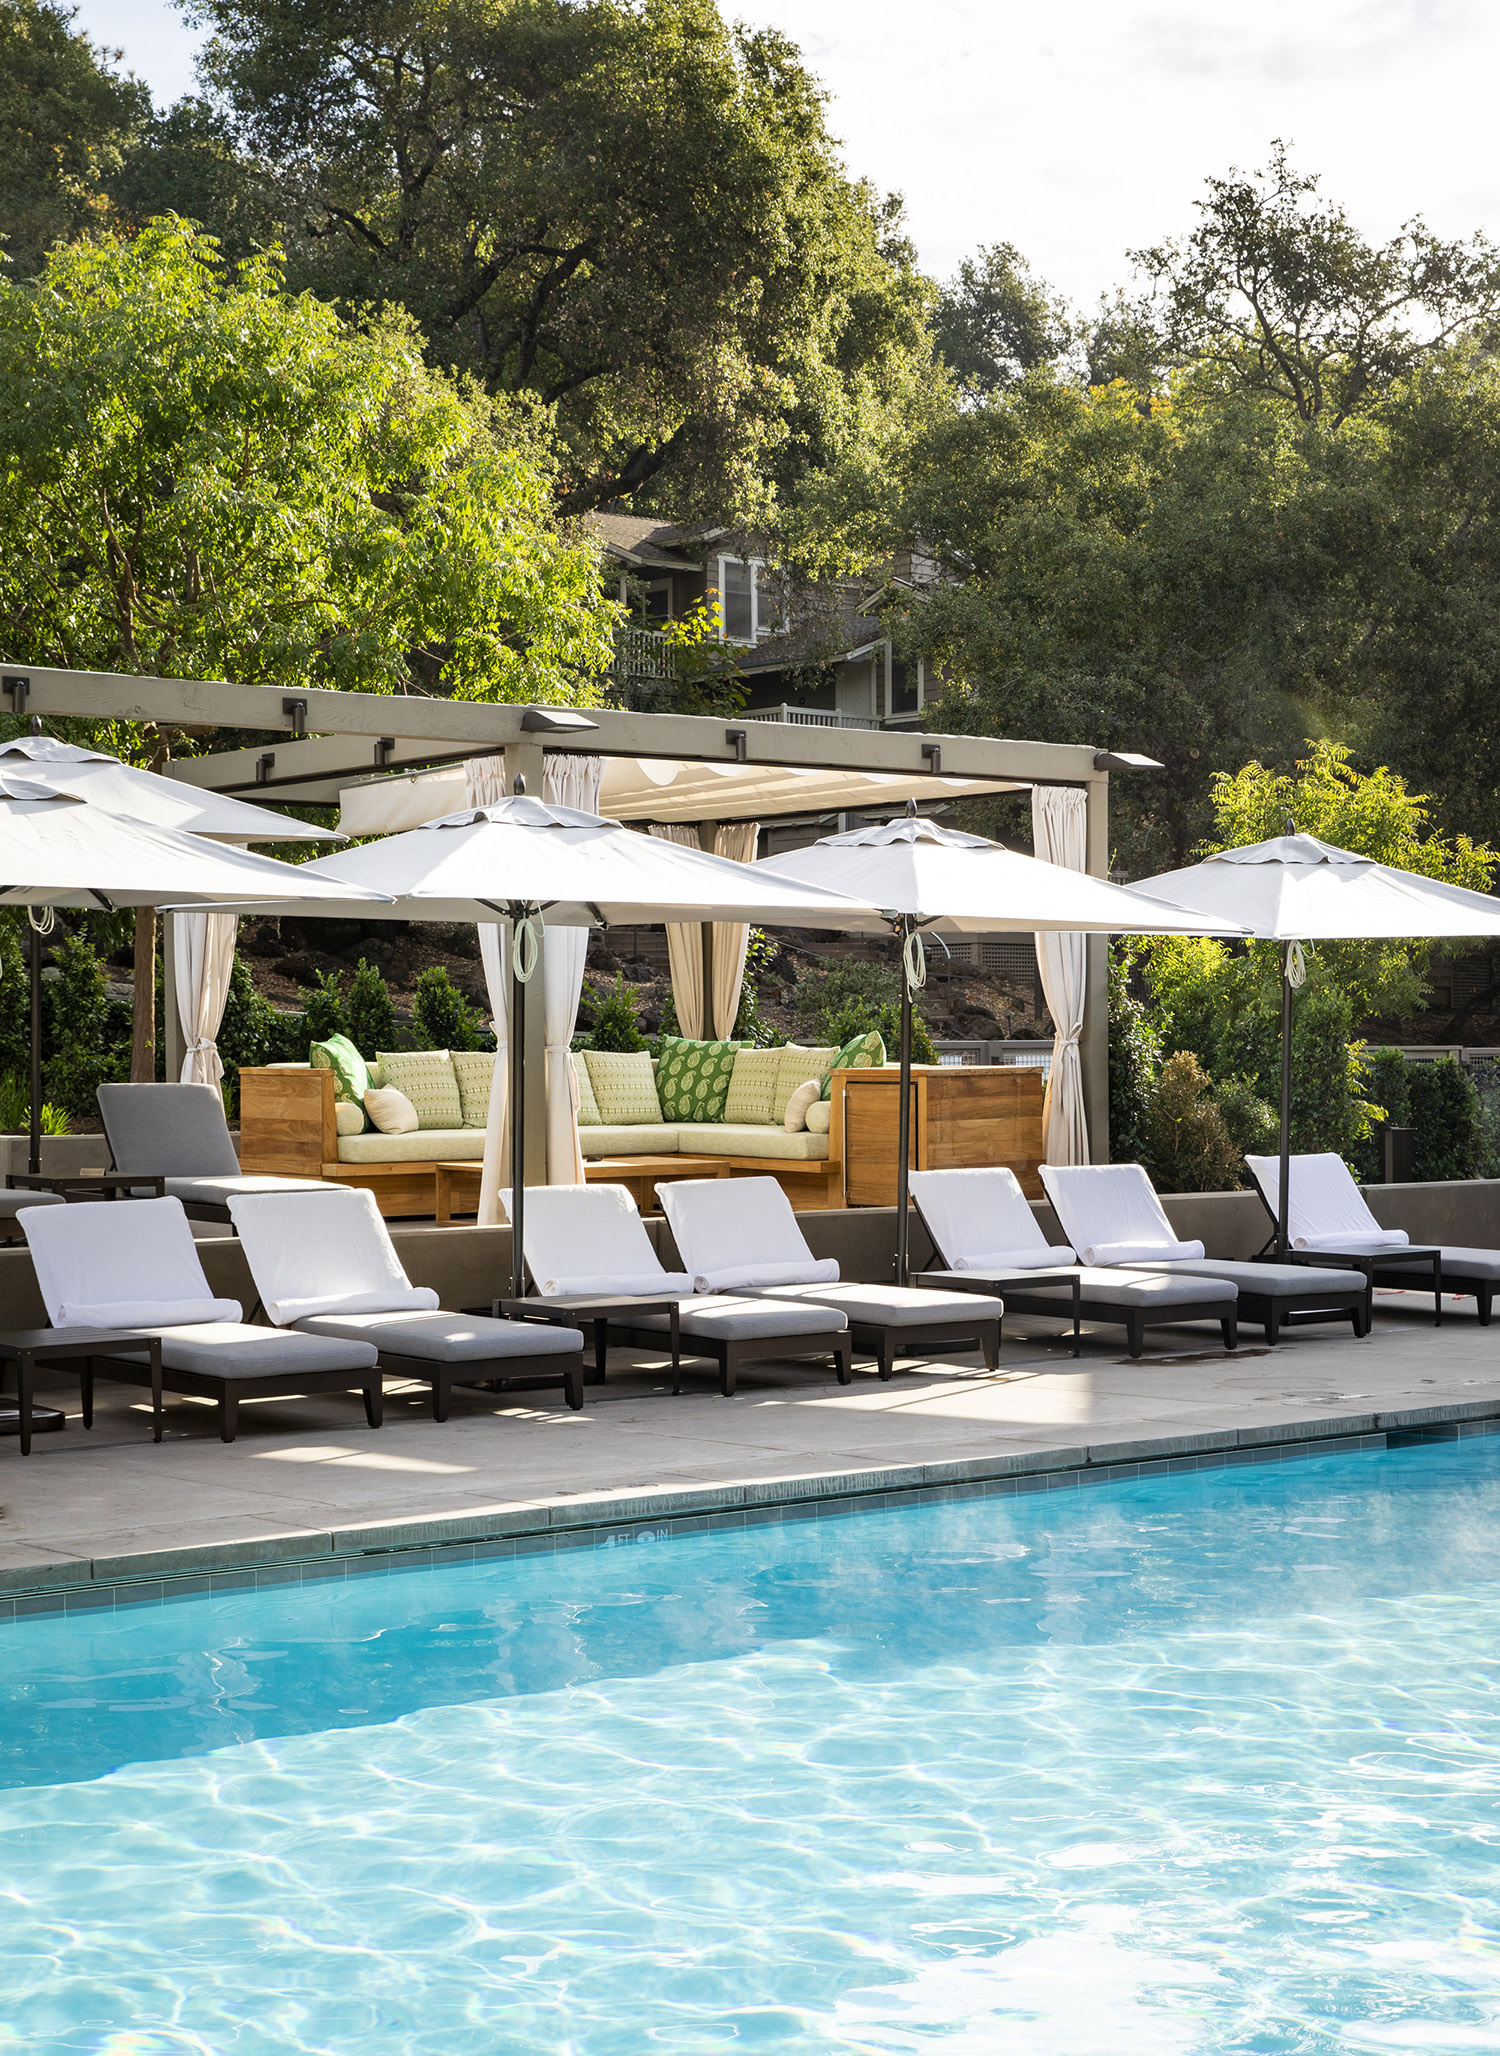 Cabana Pool with chaise lounges and umbrellas